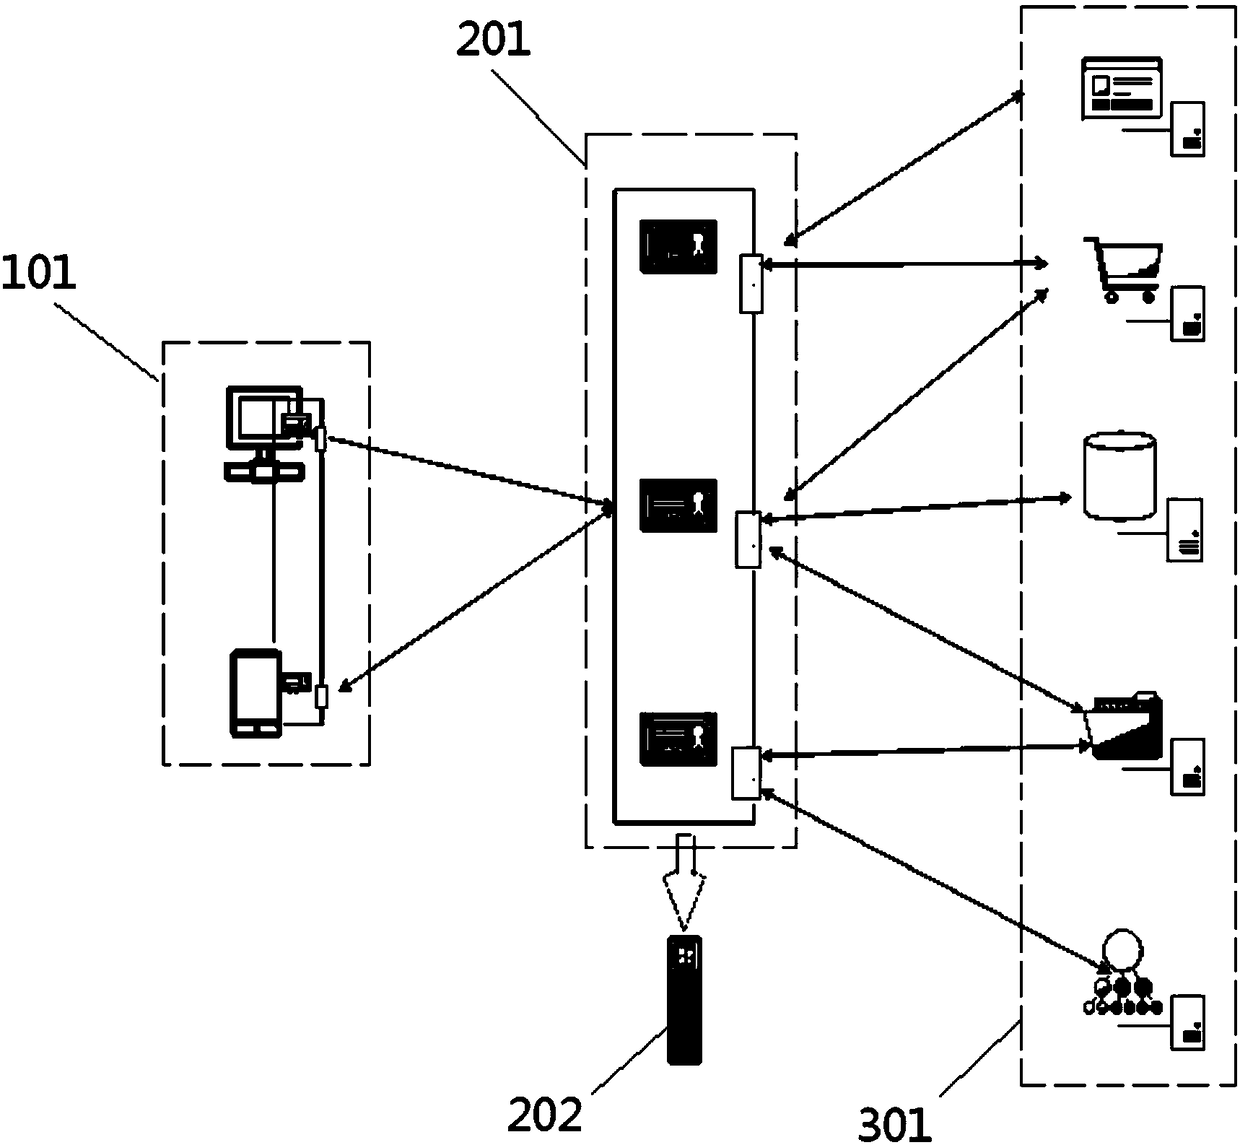 Method for preventing network attack performed by using legal data or tampering legal data